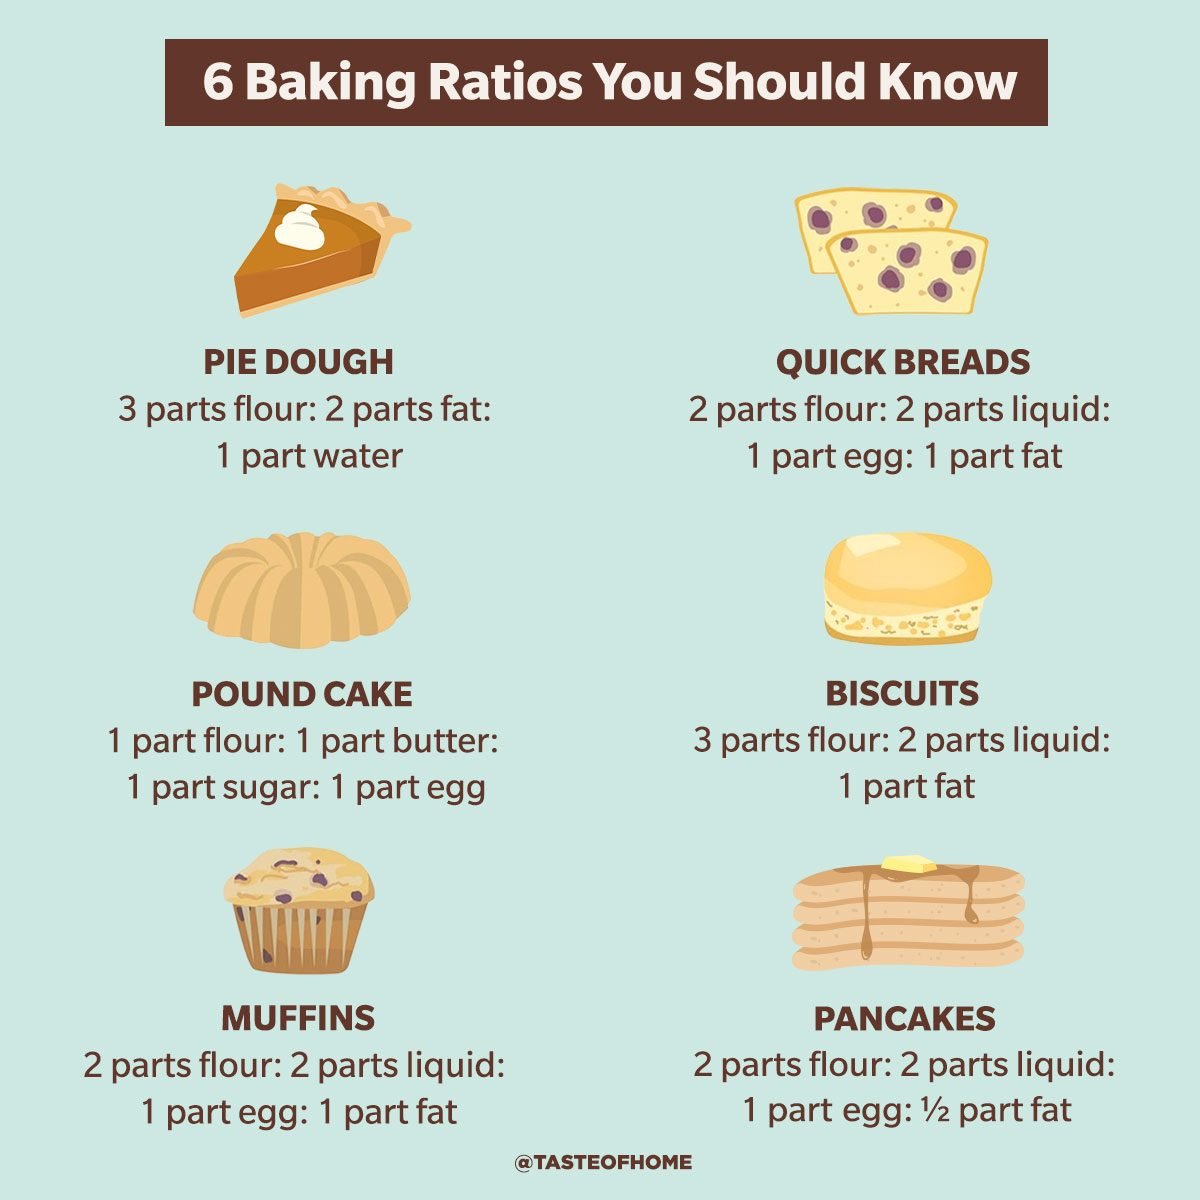 https://www.tasteofhome.com/wp-content/uploads/2021/03/6-baking-ratios-you-should-know-graphic-1200x1200-1.jpg